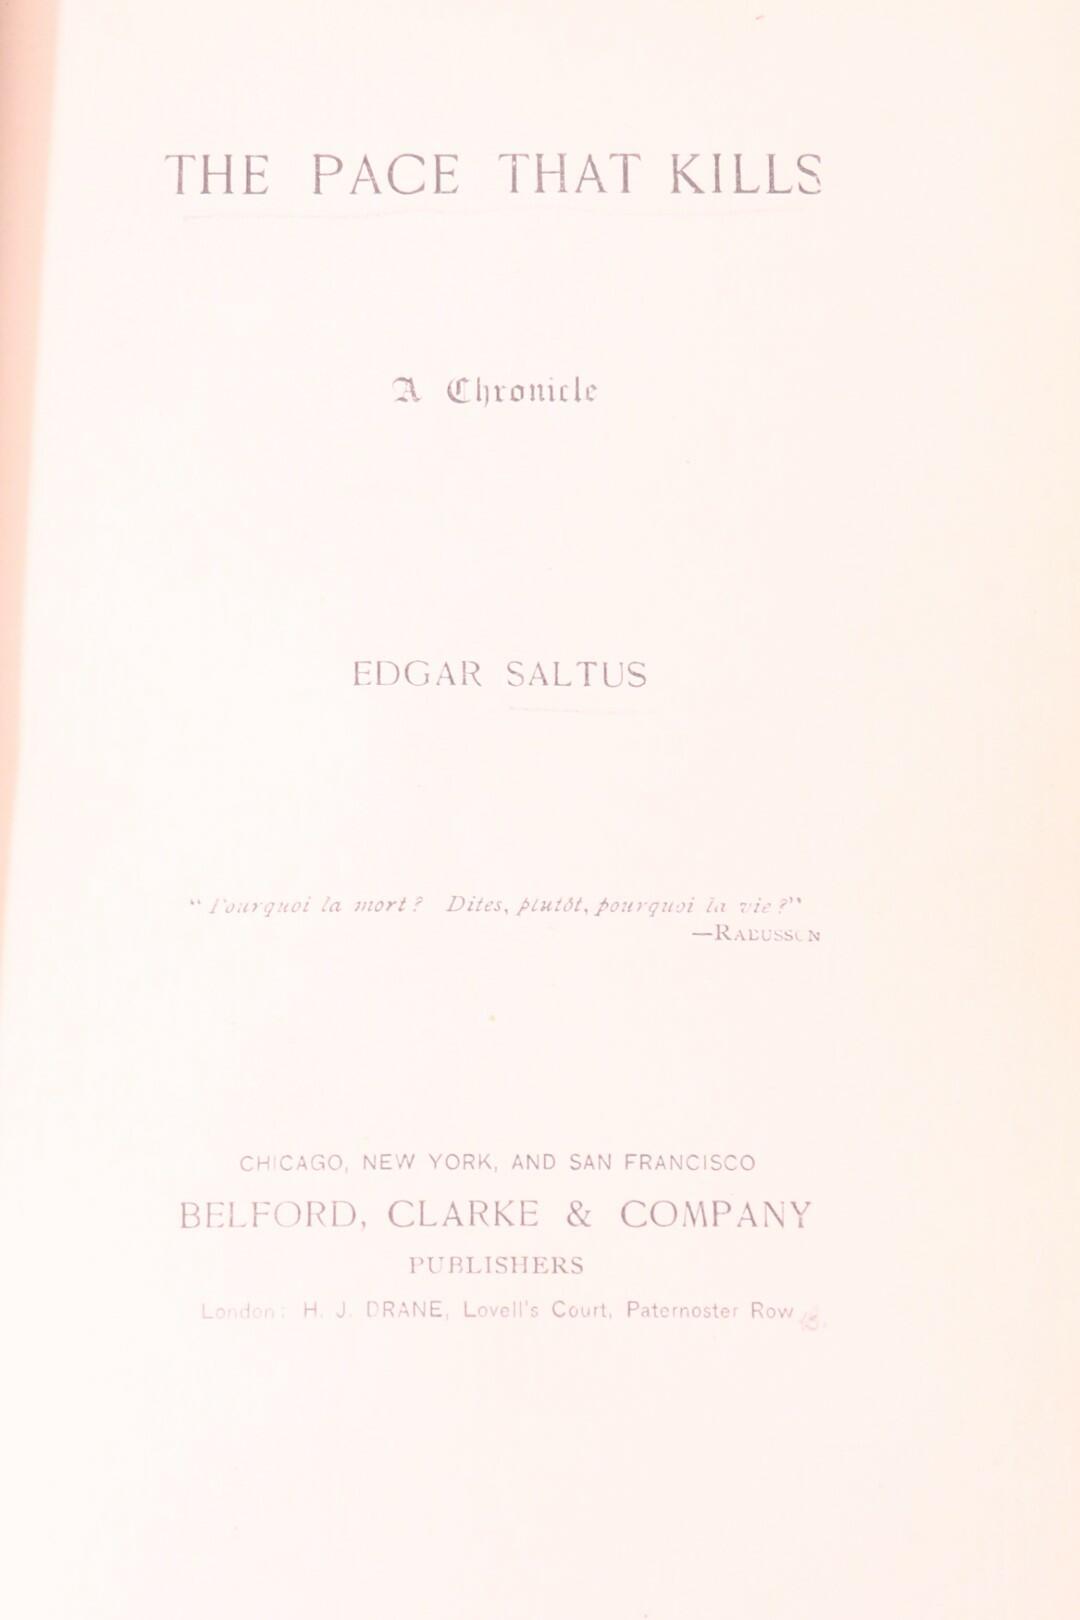 Edgar Saltus - A Transient Guest w/ The Pace that Kills - Bedford, Clarke, 1888-1889, First Edition.